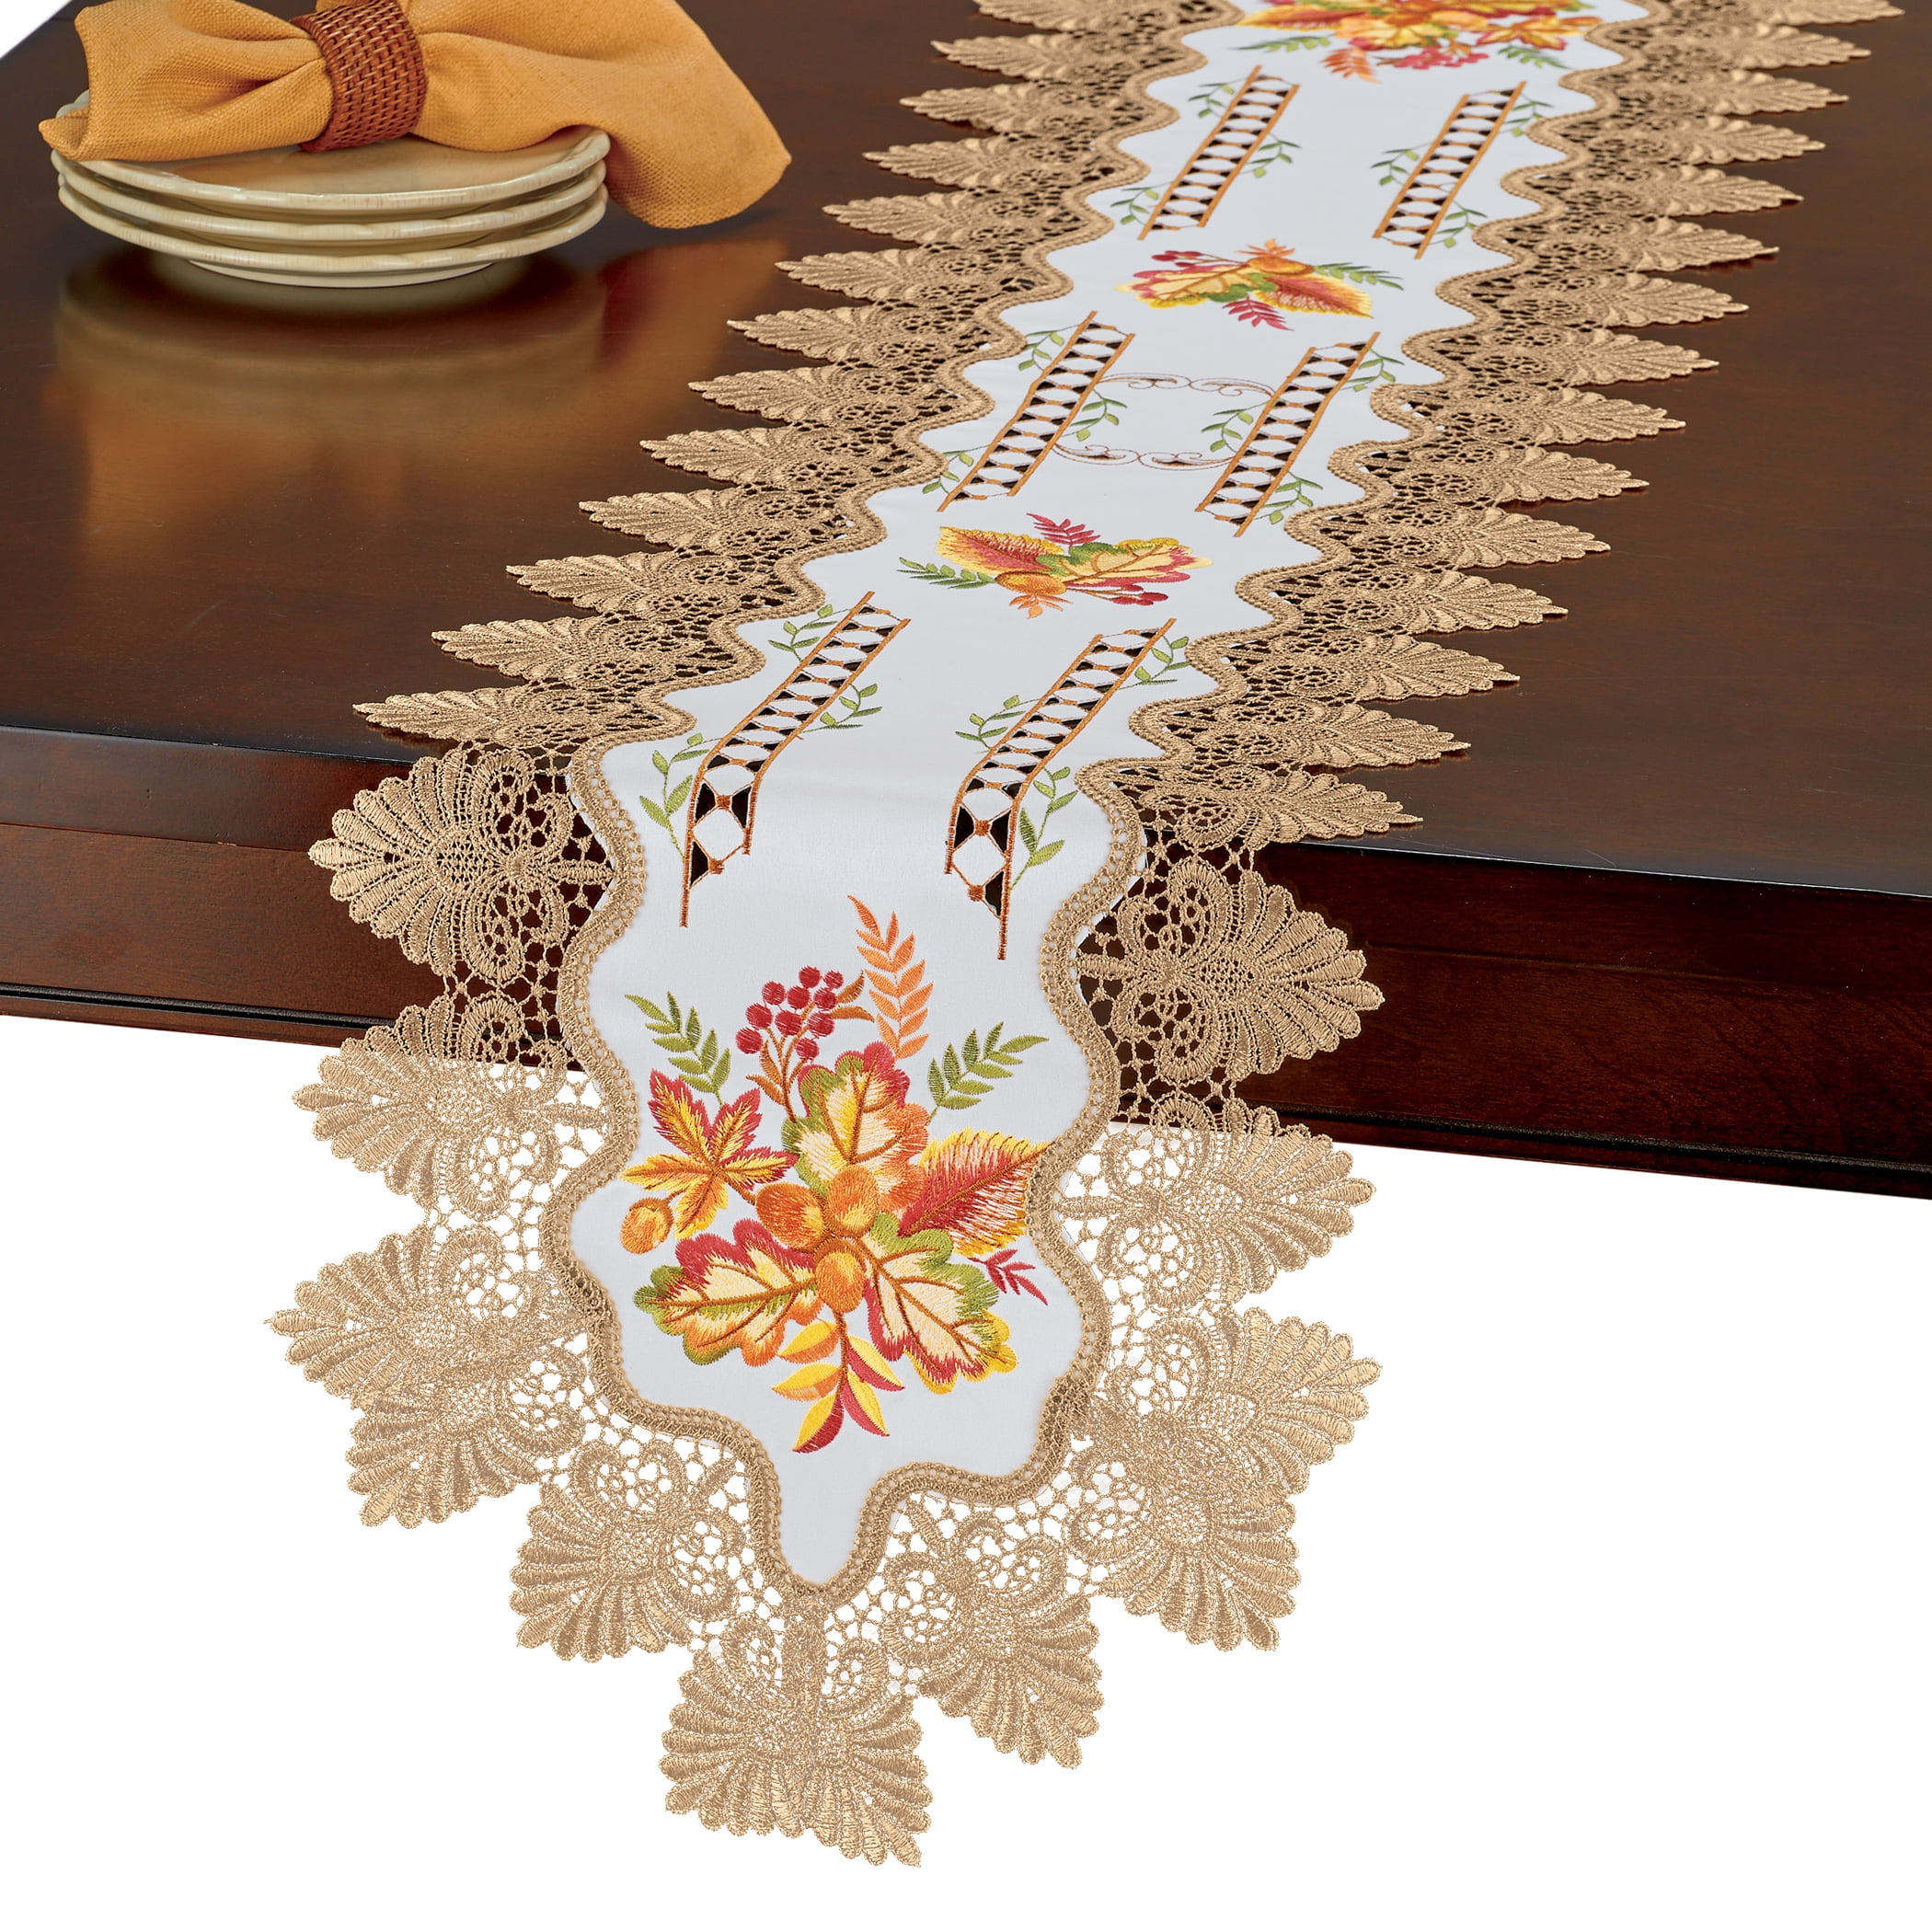 Autumn Fall Doily Table Runner Tablecloth Linen-look Green Beige Embroidery